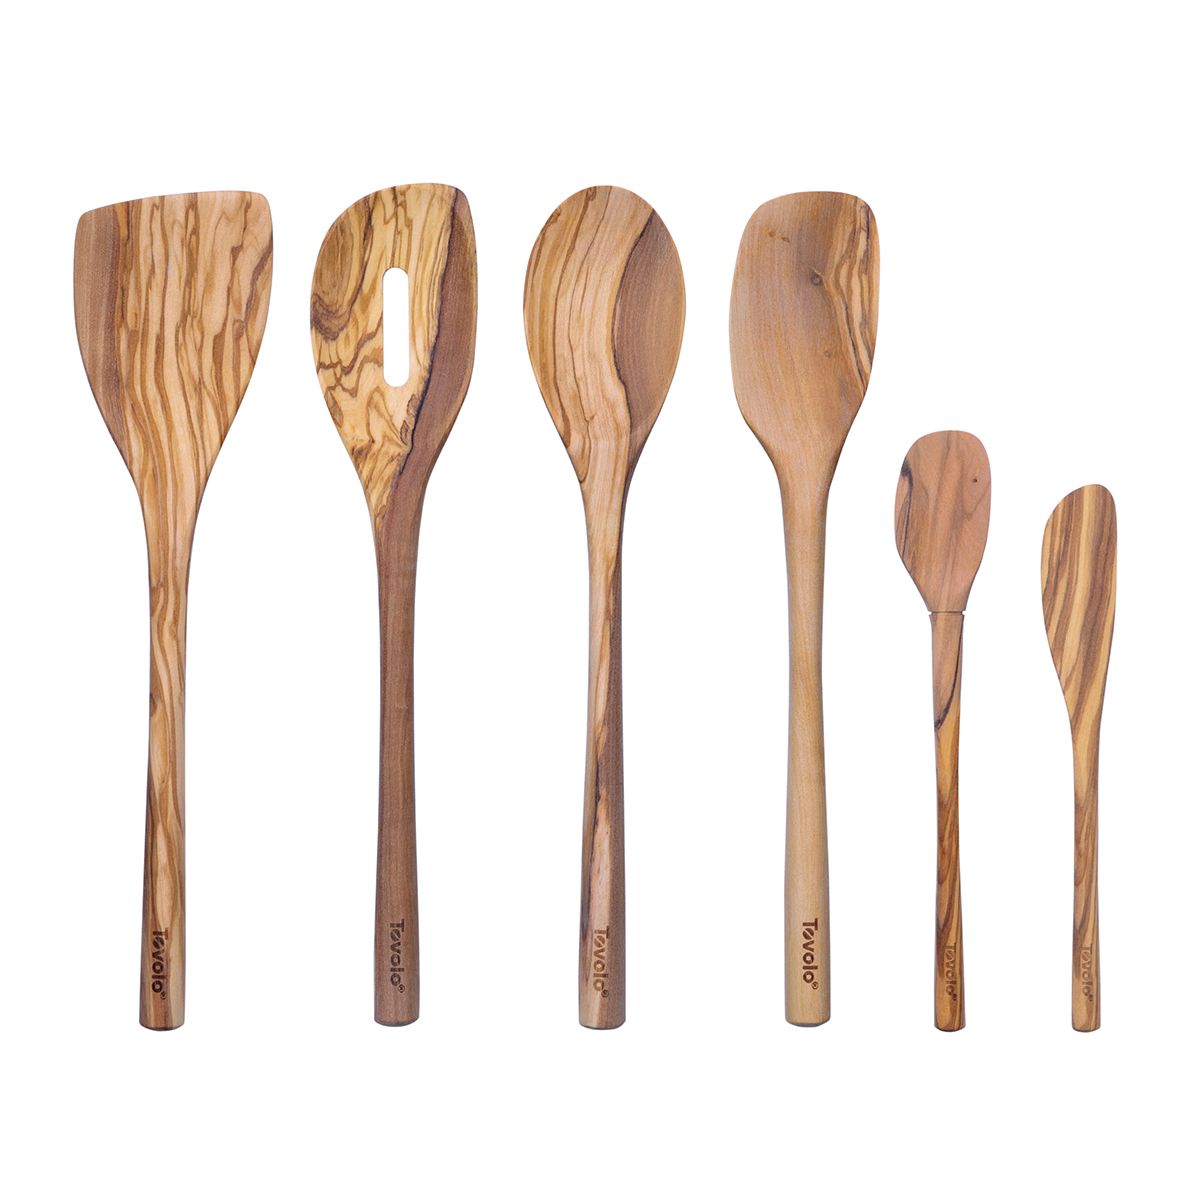 Tovolo Wood Utensil Set of 6 | The Container Store